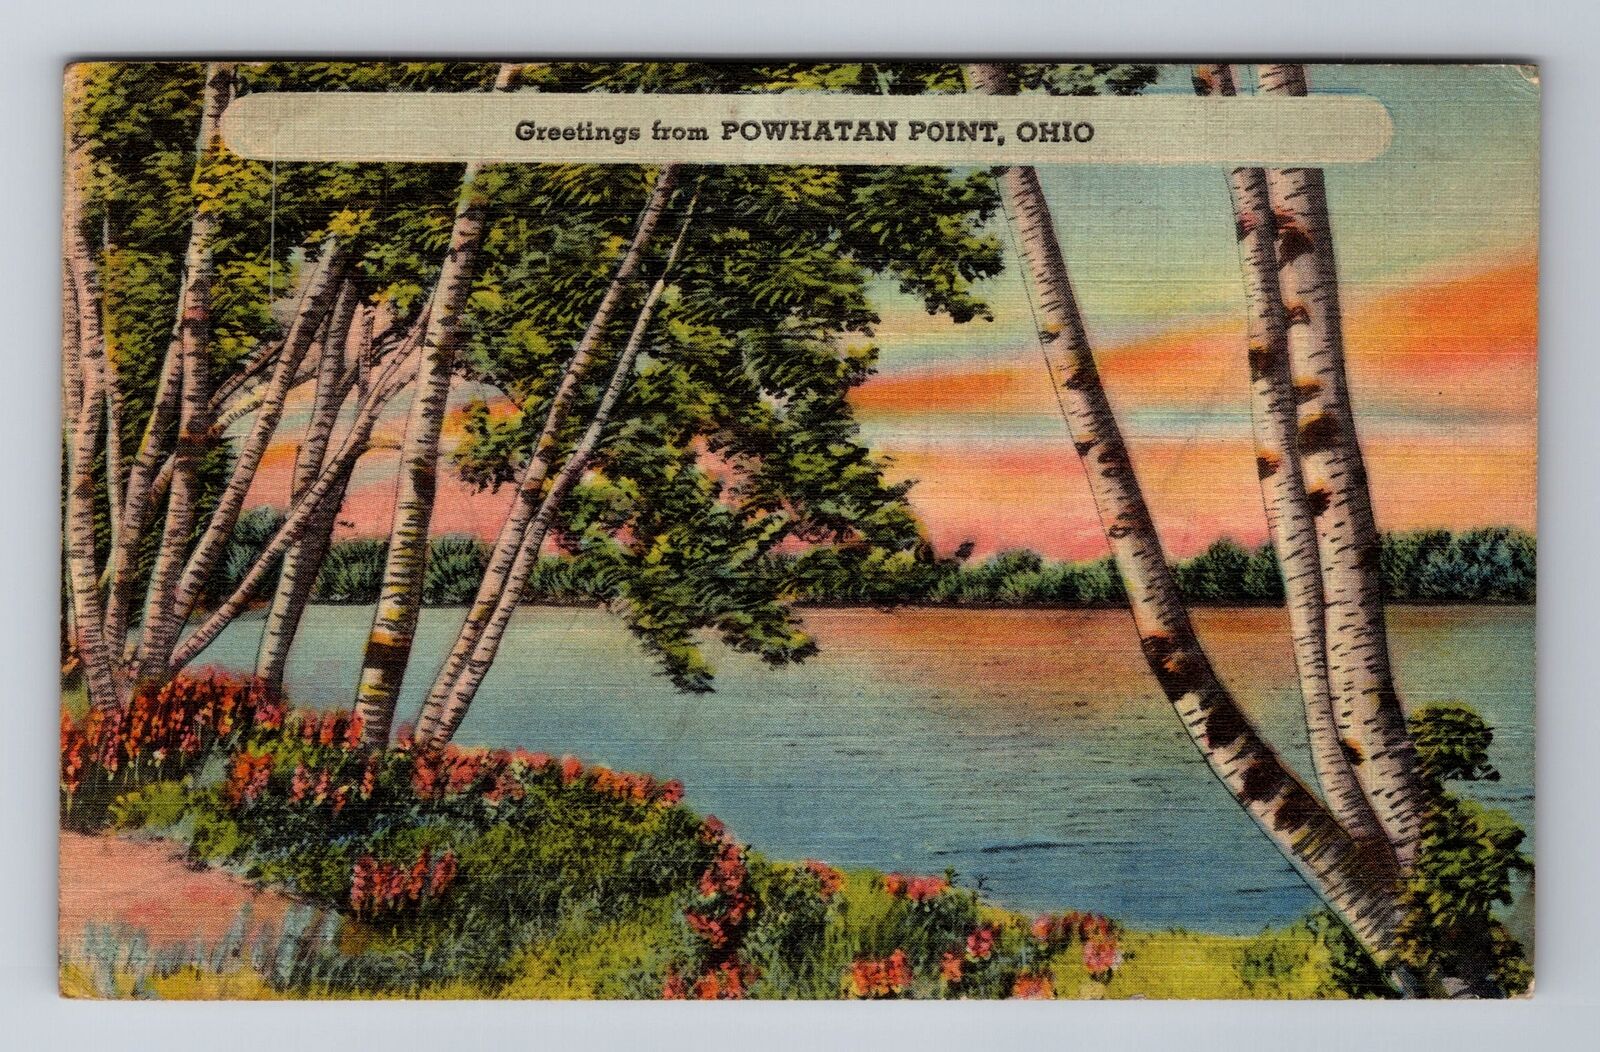 Powhatan Point OH-Ohio, Scenic General Greetings Antique Vintage c1943 Postcard